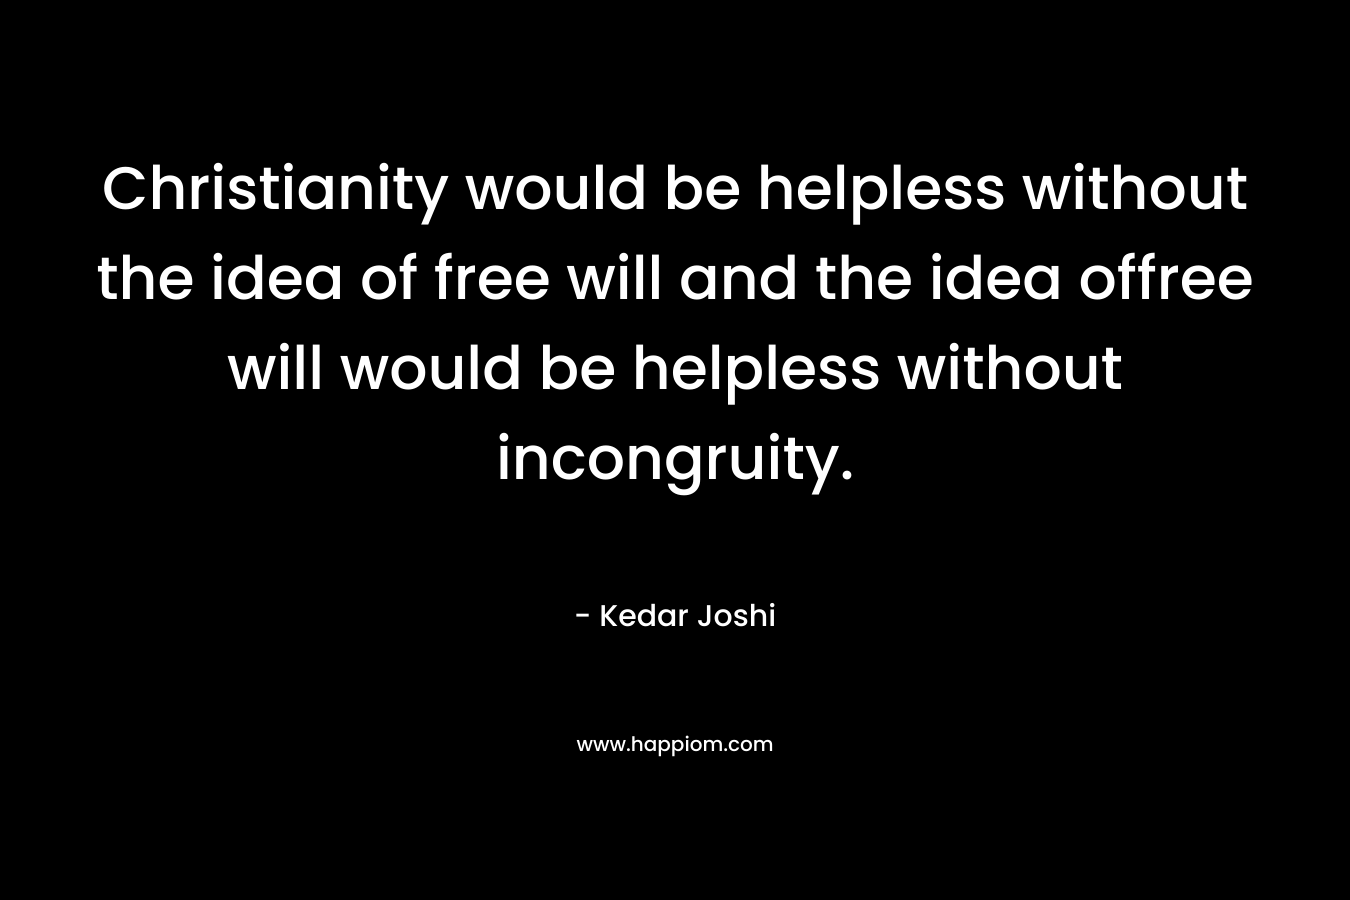 Christianity would be helpless without the idea of free will and the idea offree will would be helpless without incongruity.